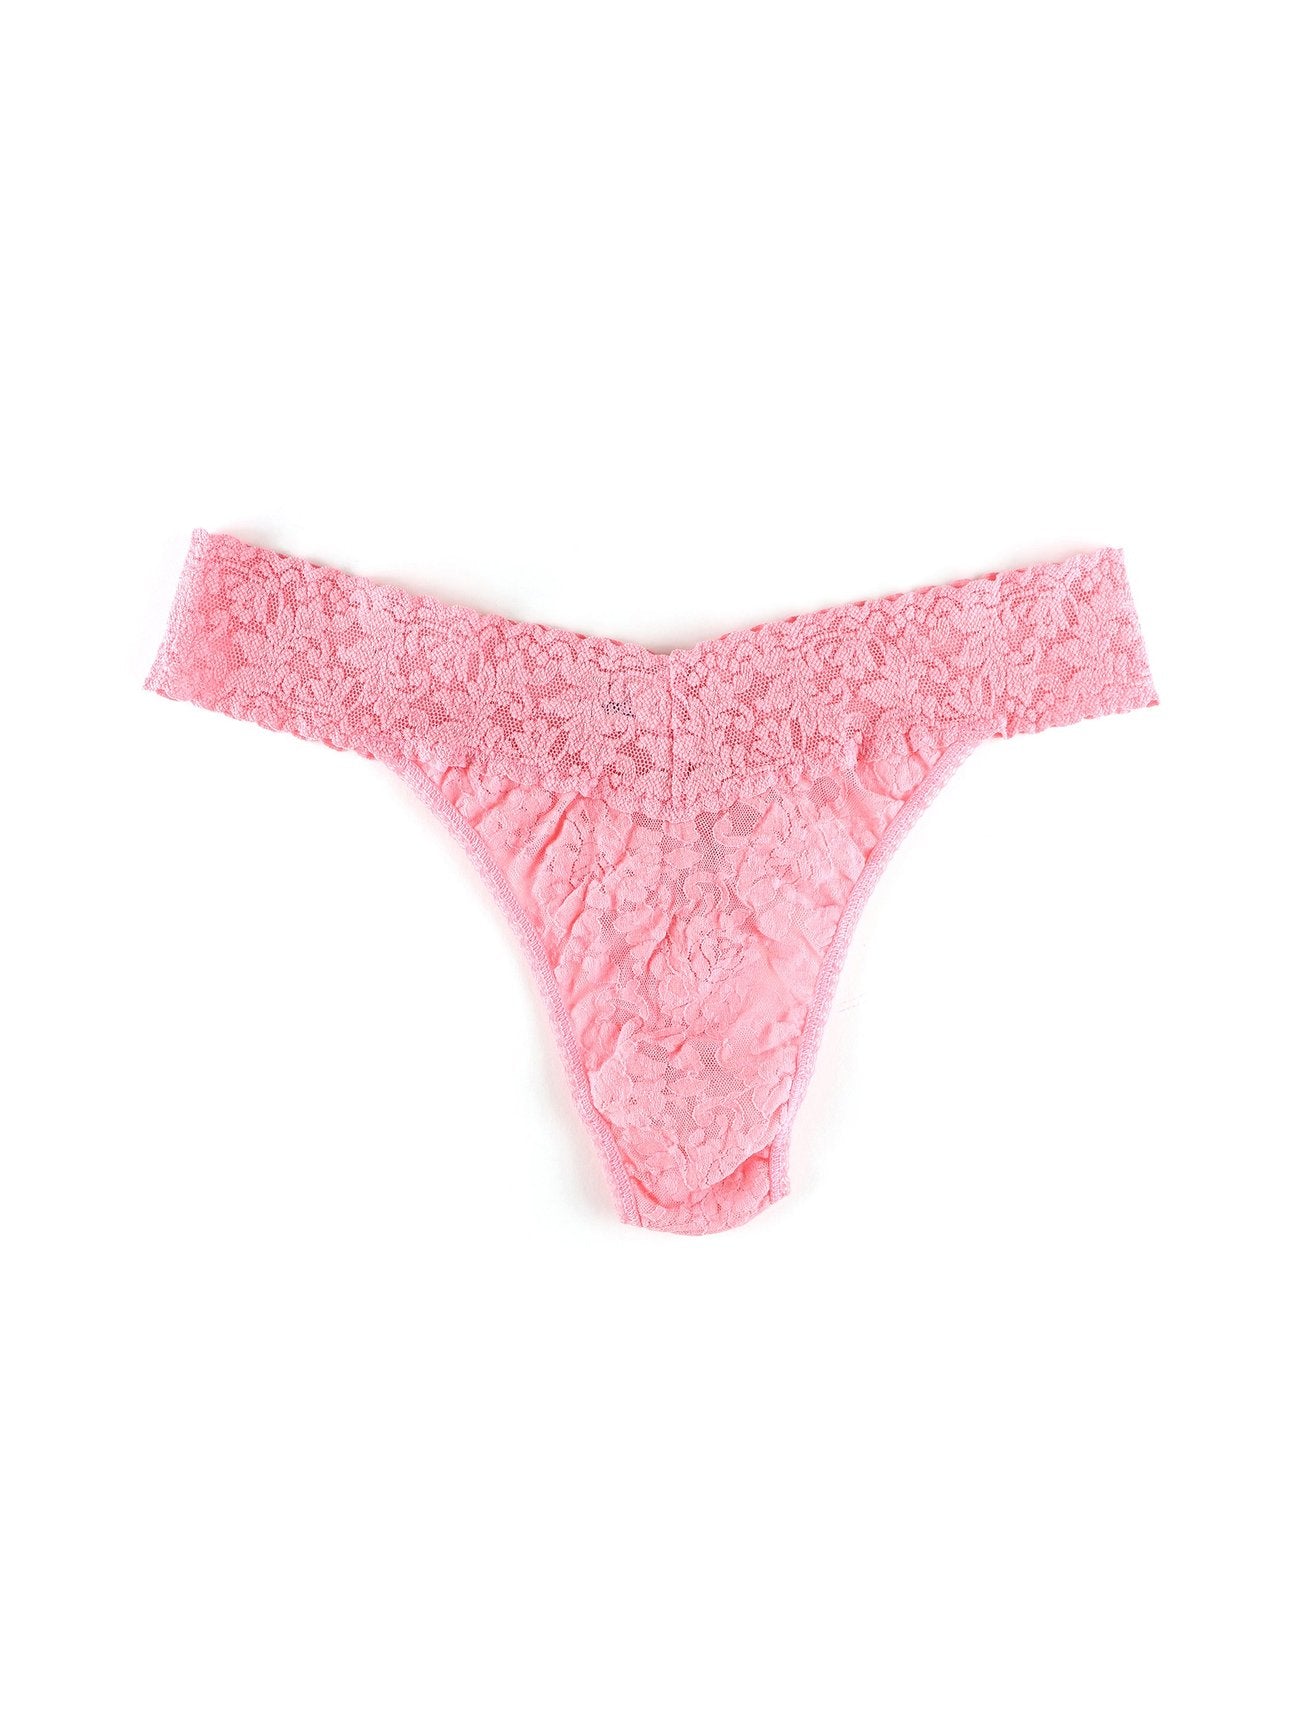 Buy pink-lady Hanky Panky Signature Lace Original Rise Thong-Packaged 4811p